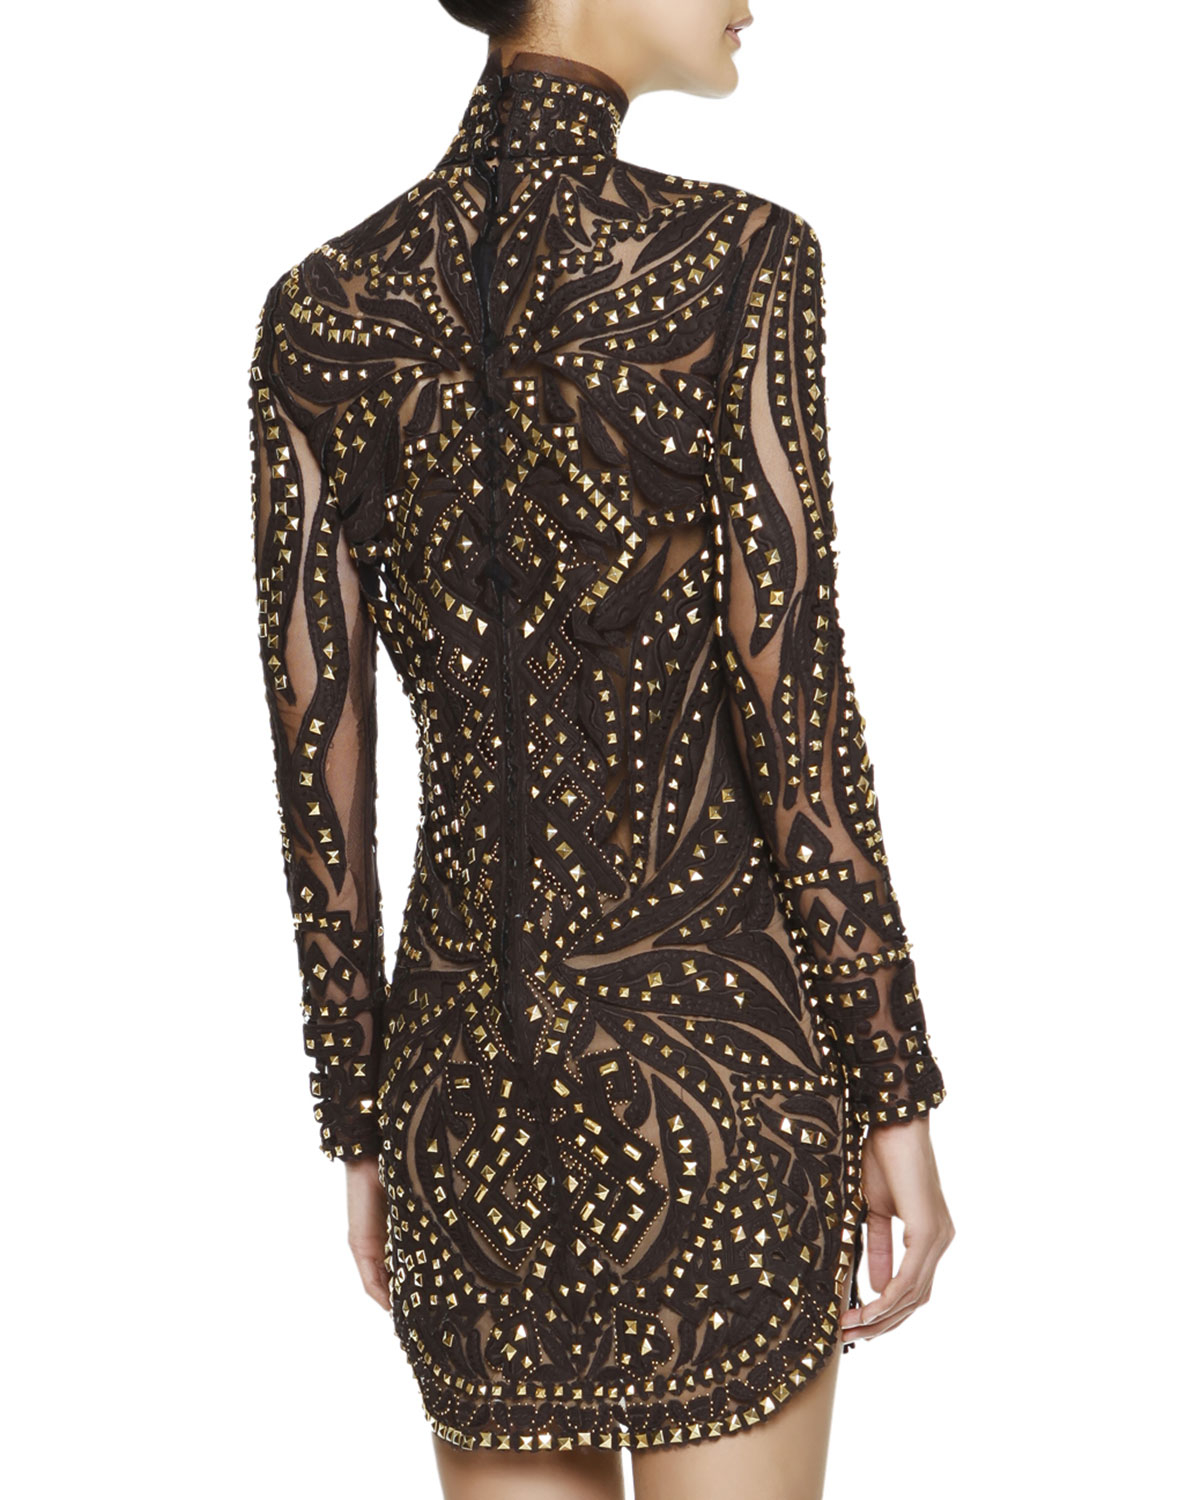 Lyst - Emilio pucci Studded Leather & Lace Turtleneck Dress in Black